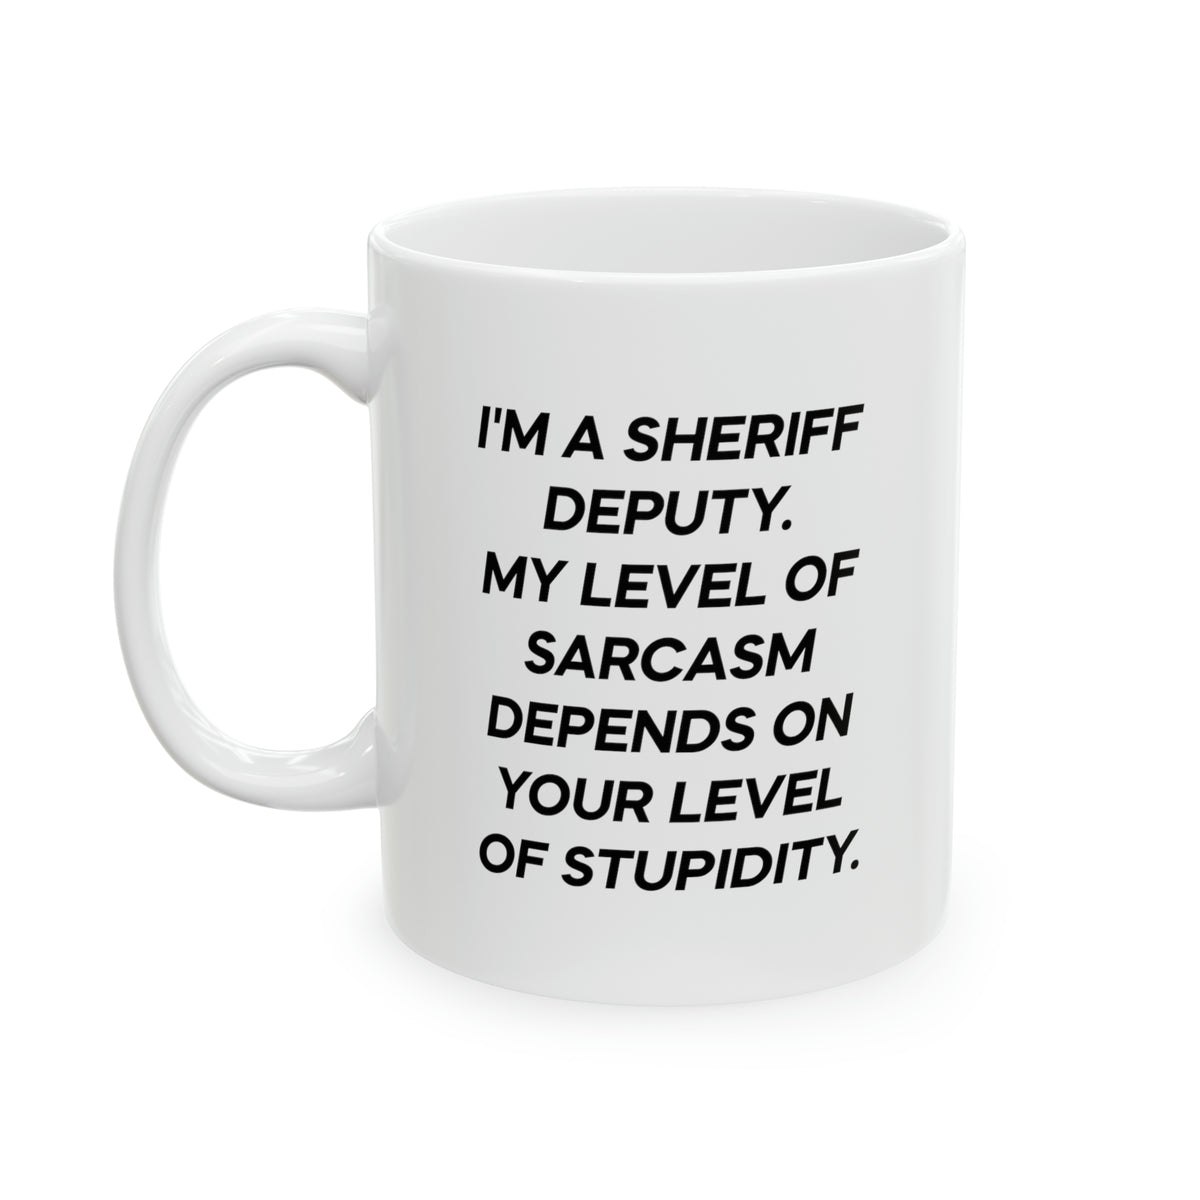 Sheriﬀ deputy Gifts, I'm A Sheriﬀ deputy Coffee Mug My Level Of Sarcasm Depends On Your Level Of Stupidity. - Funny Sheriﬀ deputy 11oz Coffee Mug - Best Inspirational For Men Women, Coworkers, Friends